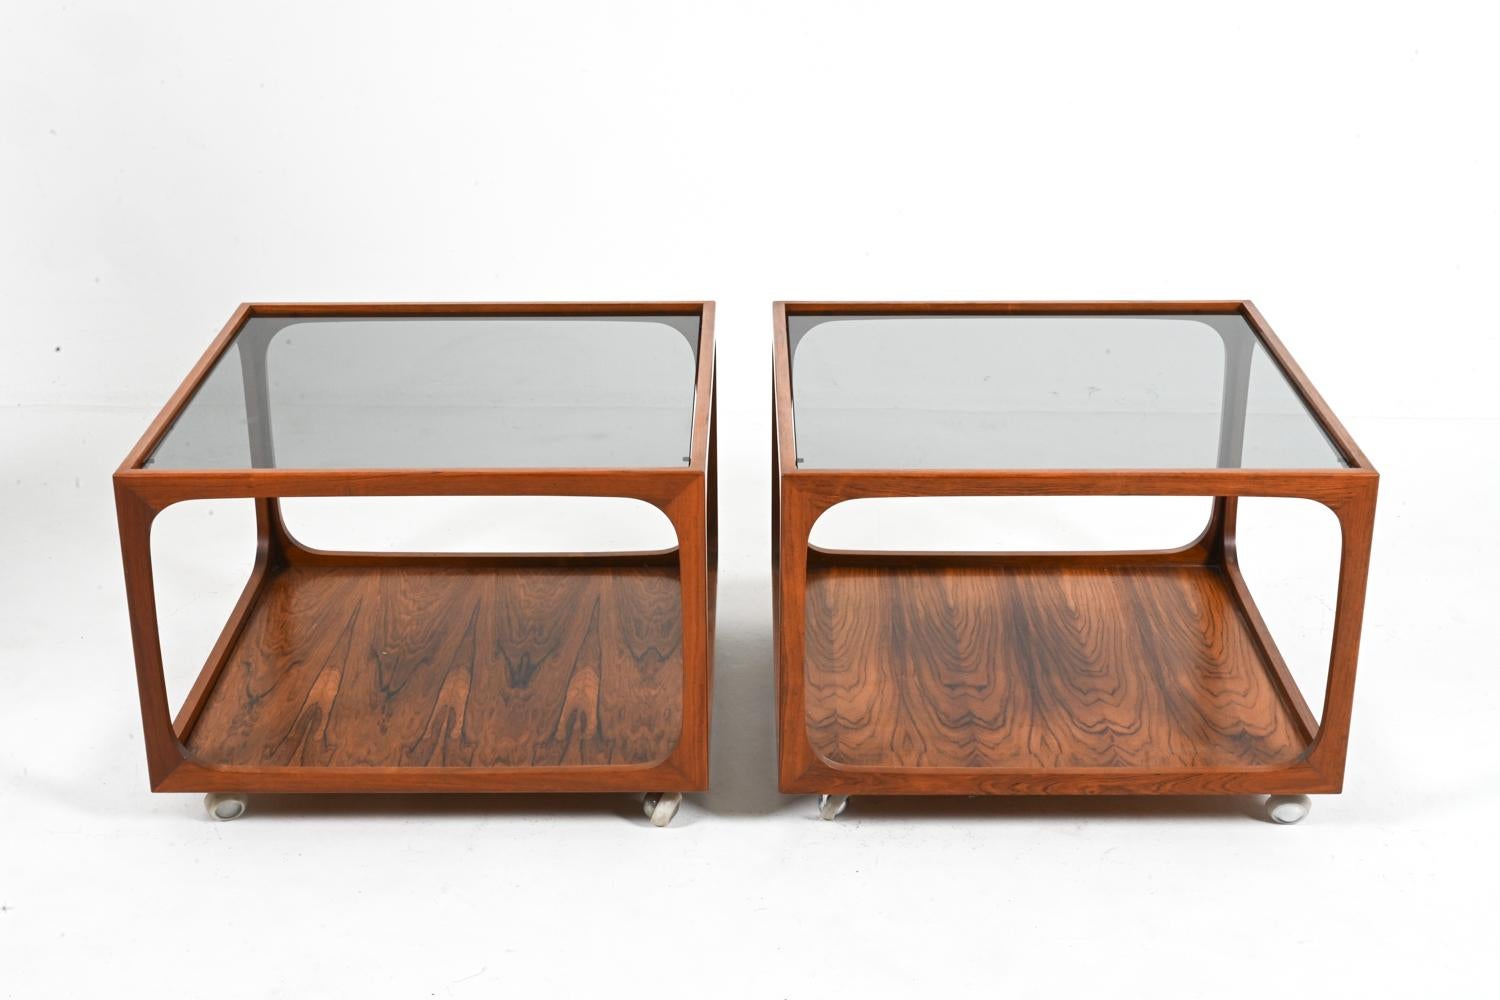 Rare Pair of Rosewood & Smoked Glass Cube End Tables Attributed to Wilhelm Renz For Sale 5